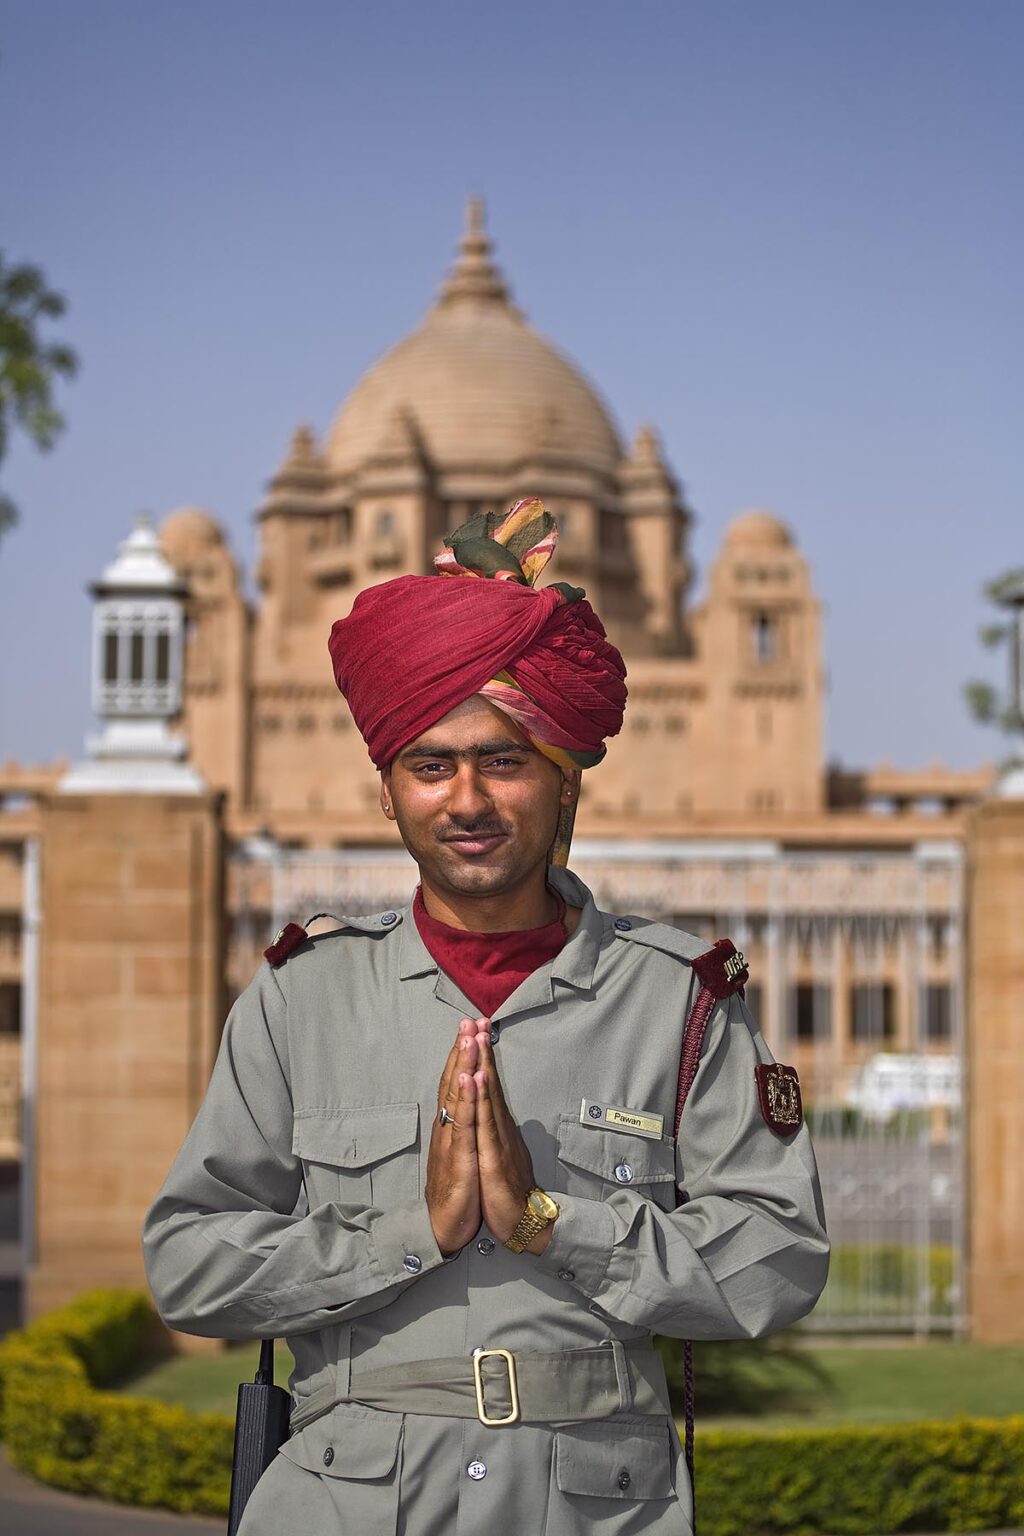 GUARD outside of the UMAID BHAWAN PALACE which was built in 1929 and created work in a depressed time - JOHDPUR, RAJASTHAN, INDIA